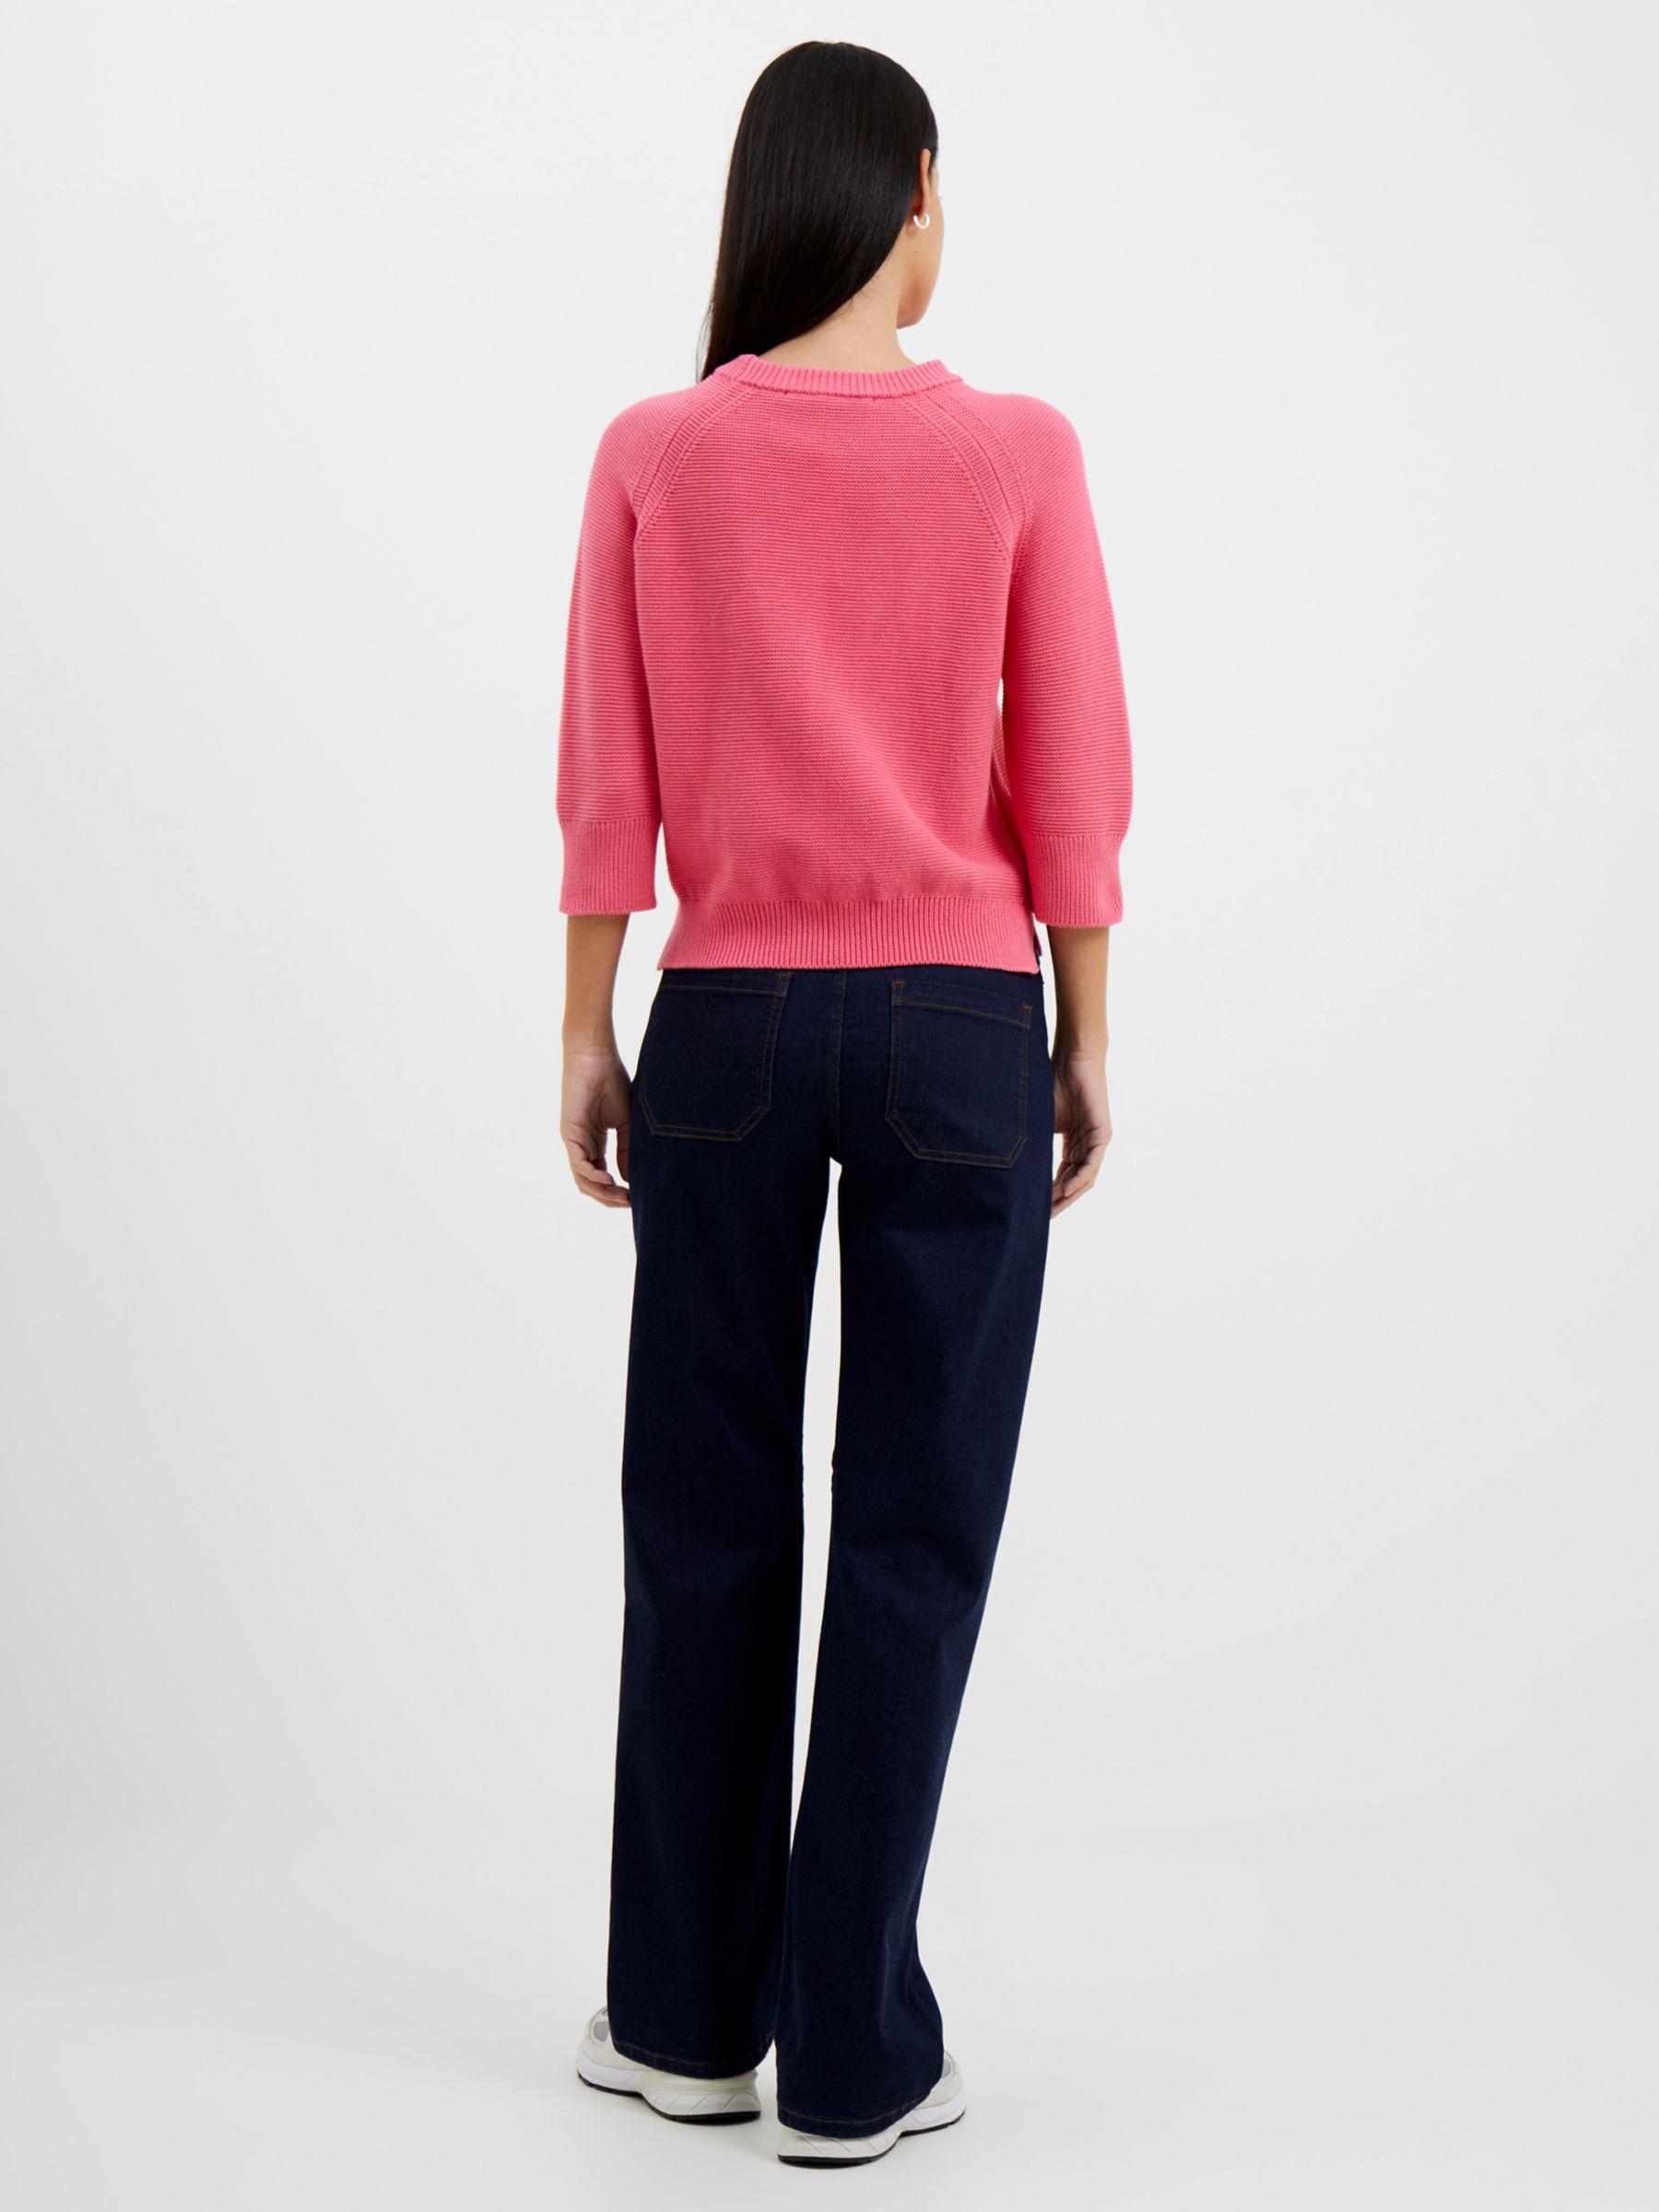 Buy French Connection Lily Mozart Cotton Jumper Online at johnlewis.com